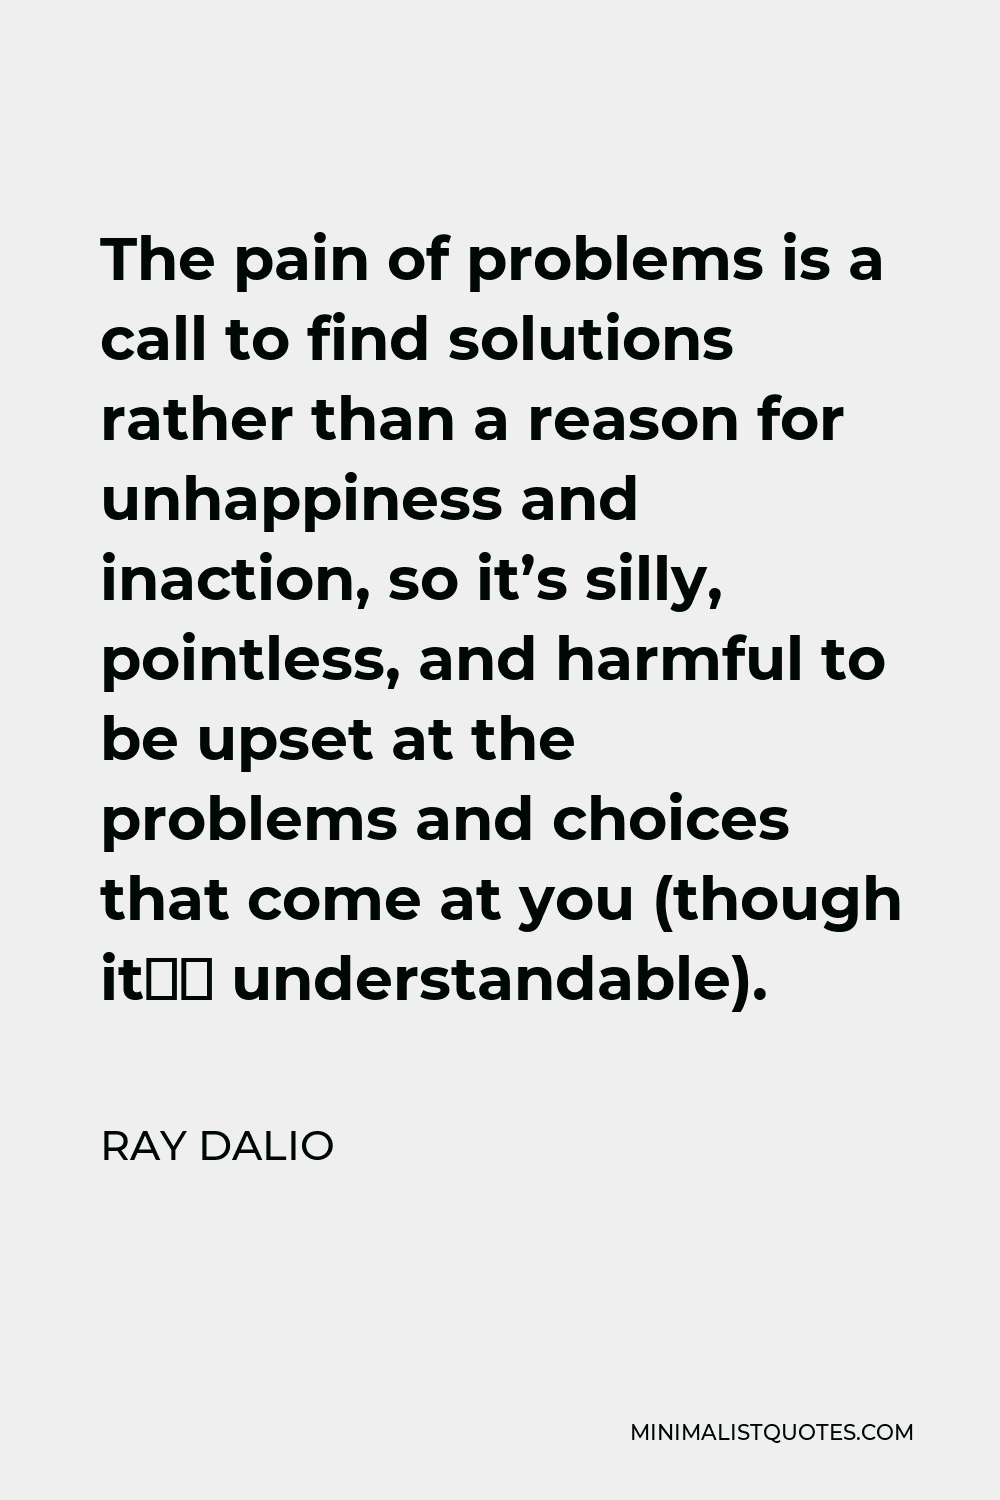 Ray Dalio Quote - The pain of problems is a call to find solutions rather than a reason for unhappiness and inaction, so it’s silly, pointless, and harmful to be upset at the problems and choices that come at you (though it’s understandable).